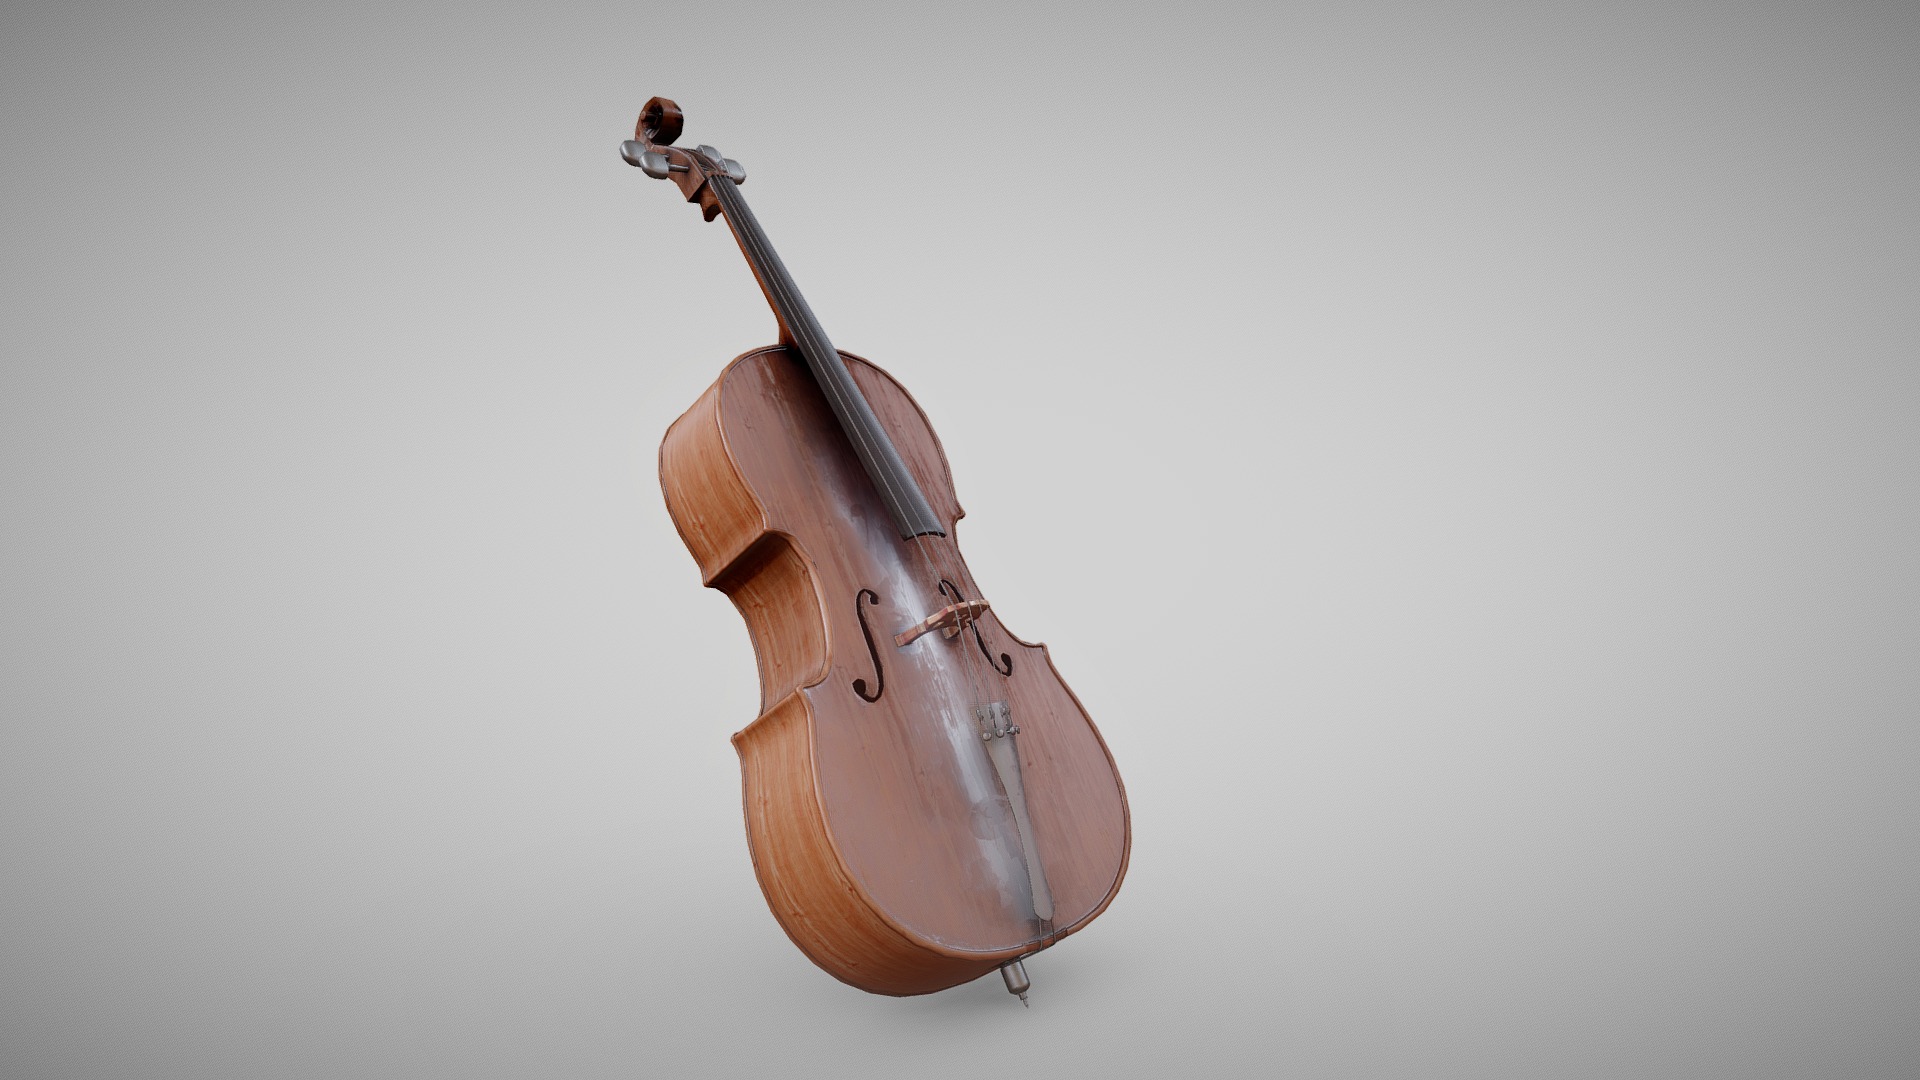 3D model Cello - This is a 3D model of the Cello. The 3D model is about a wooden violin on a white background.